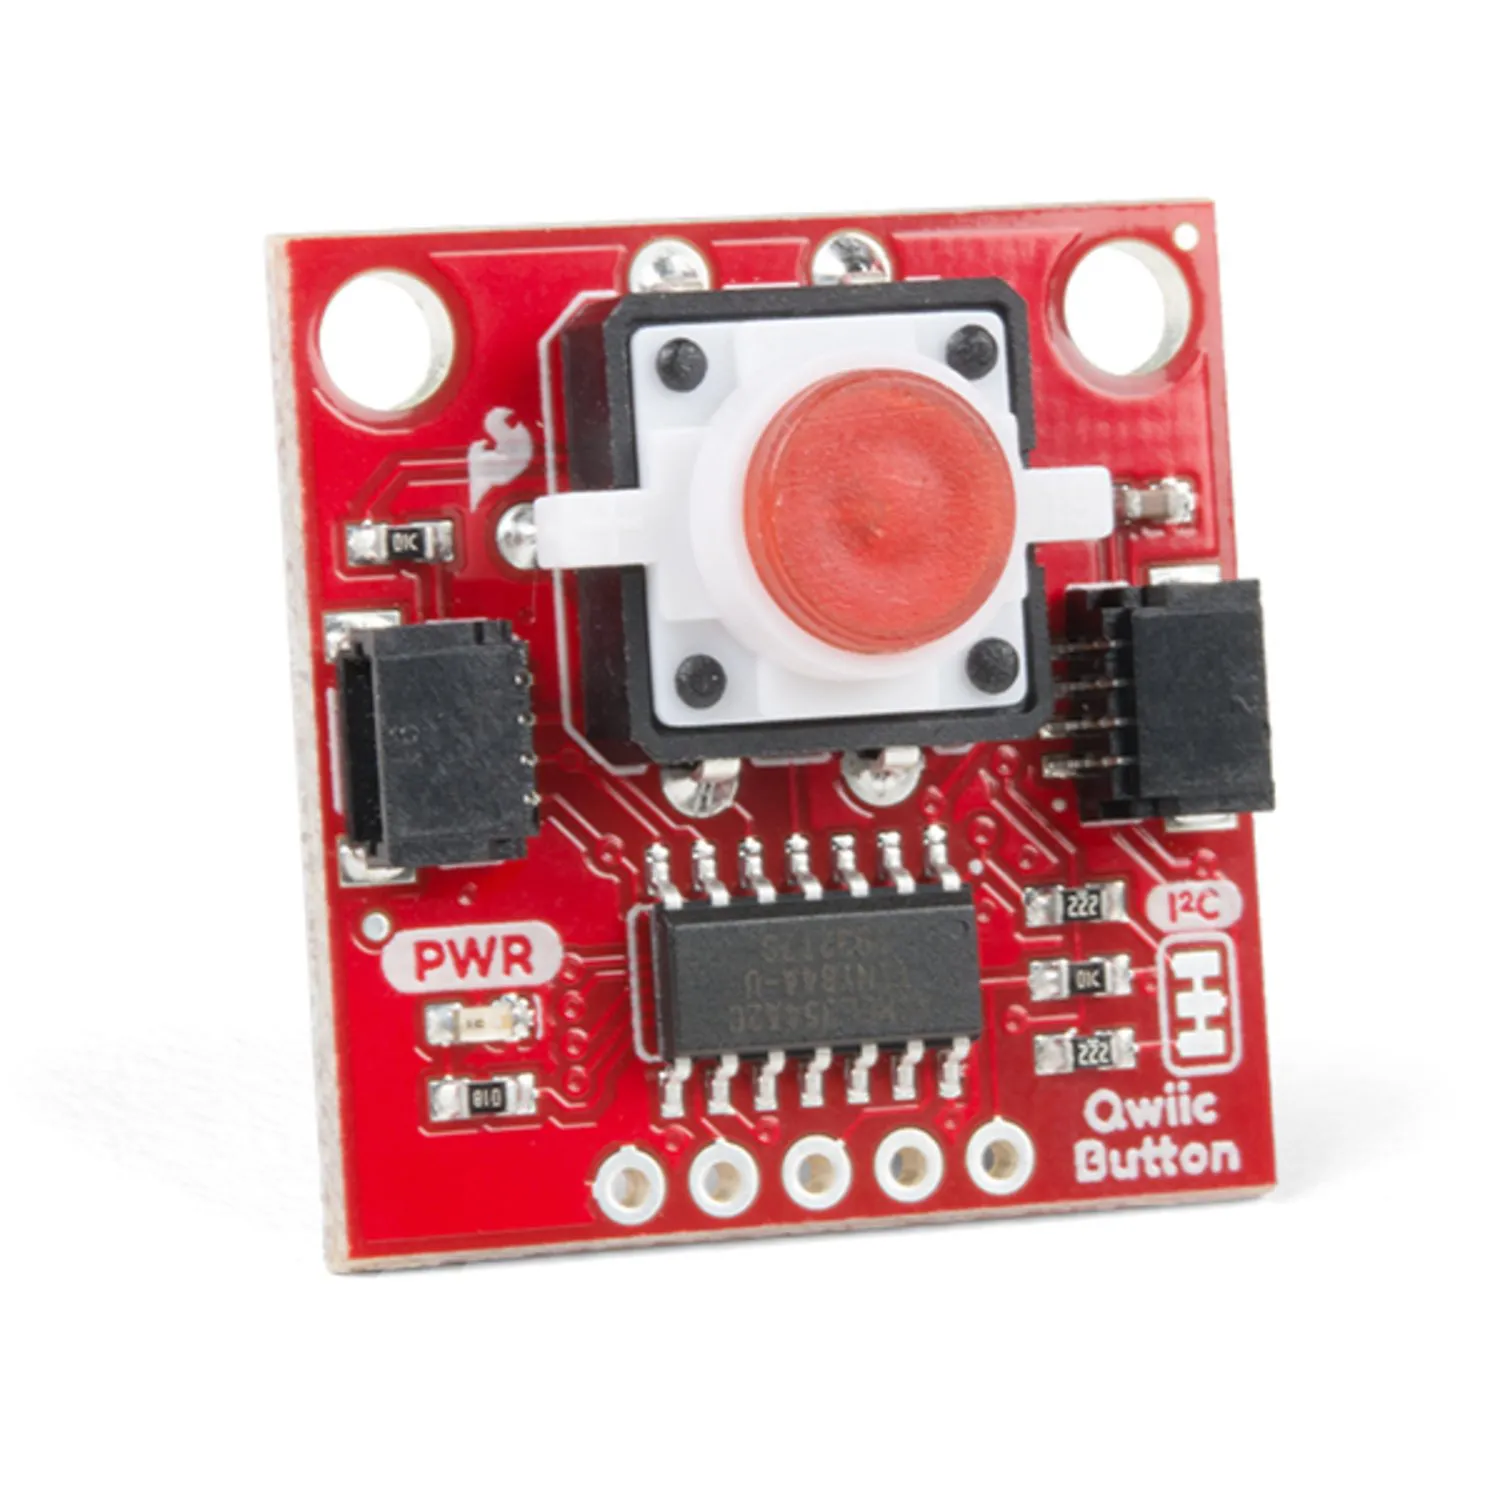 Photo of SparkFun Qwiic Button - Red LED